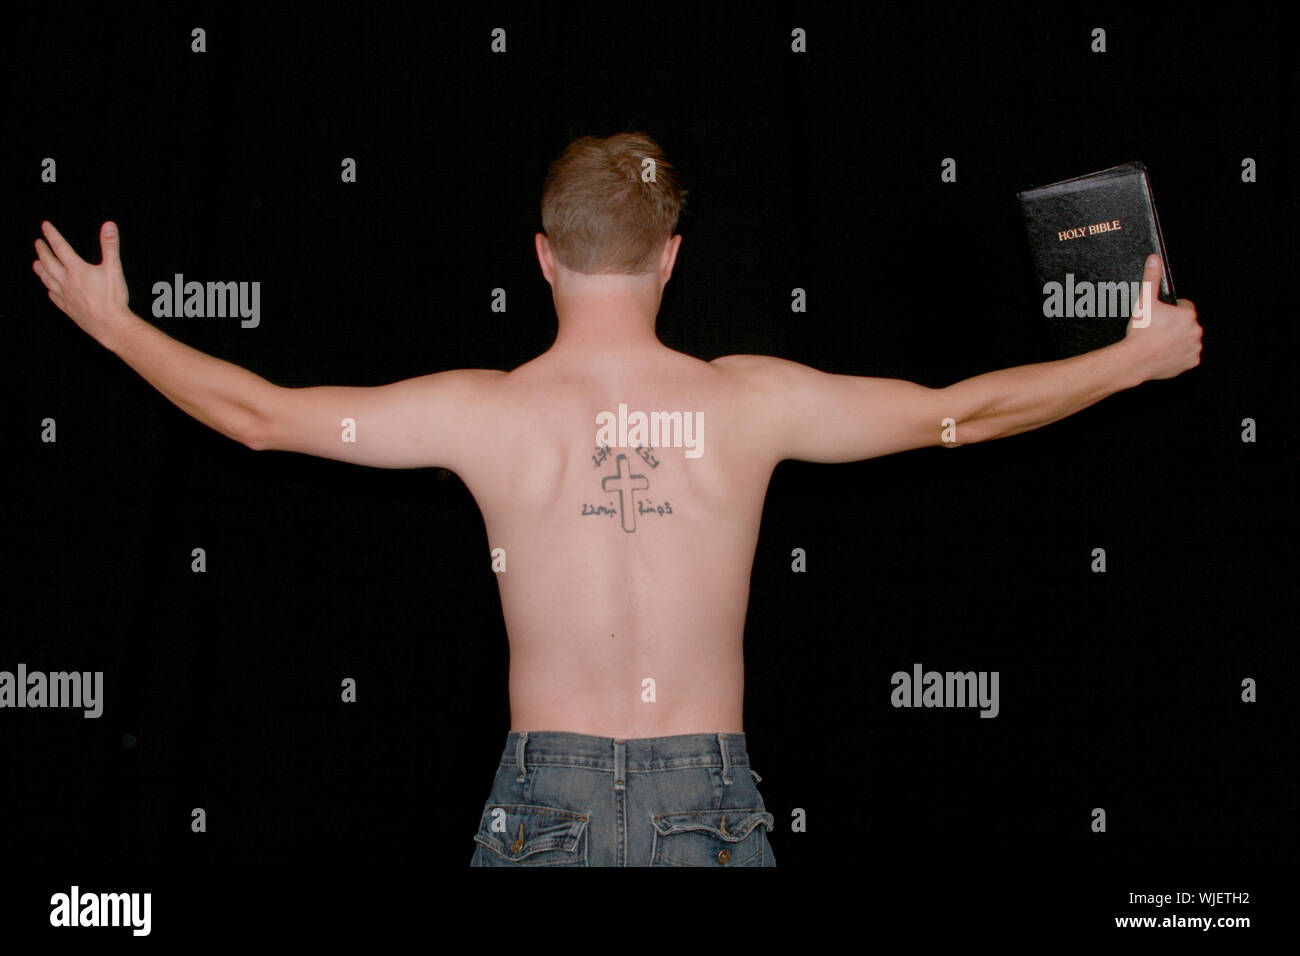 A man preaching with a crucifix and aramiac writing tattooed on his back. Stock Photo